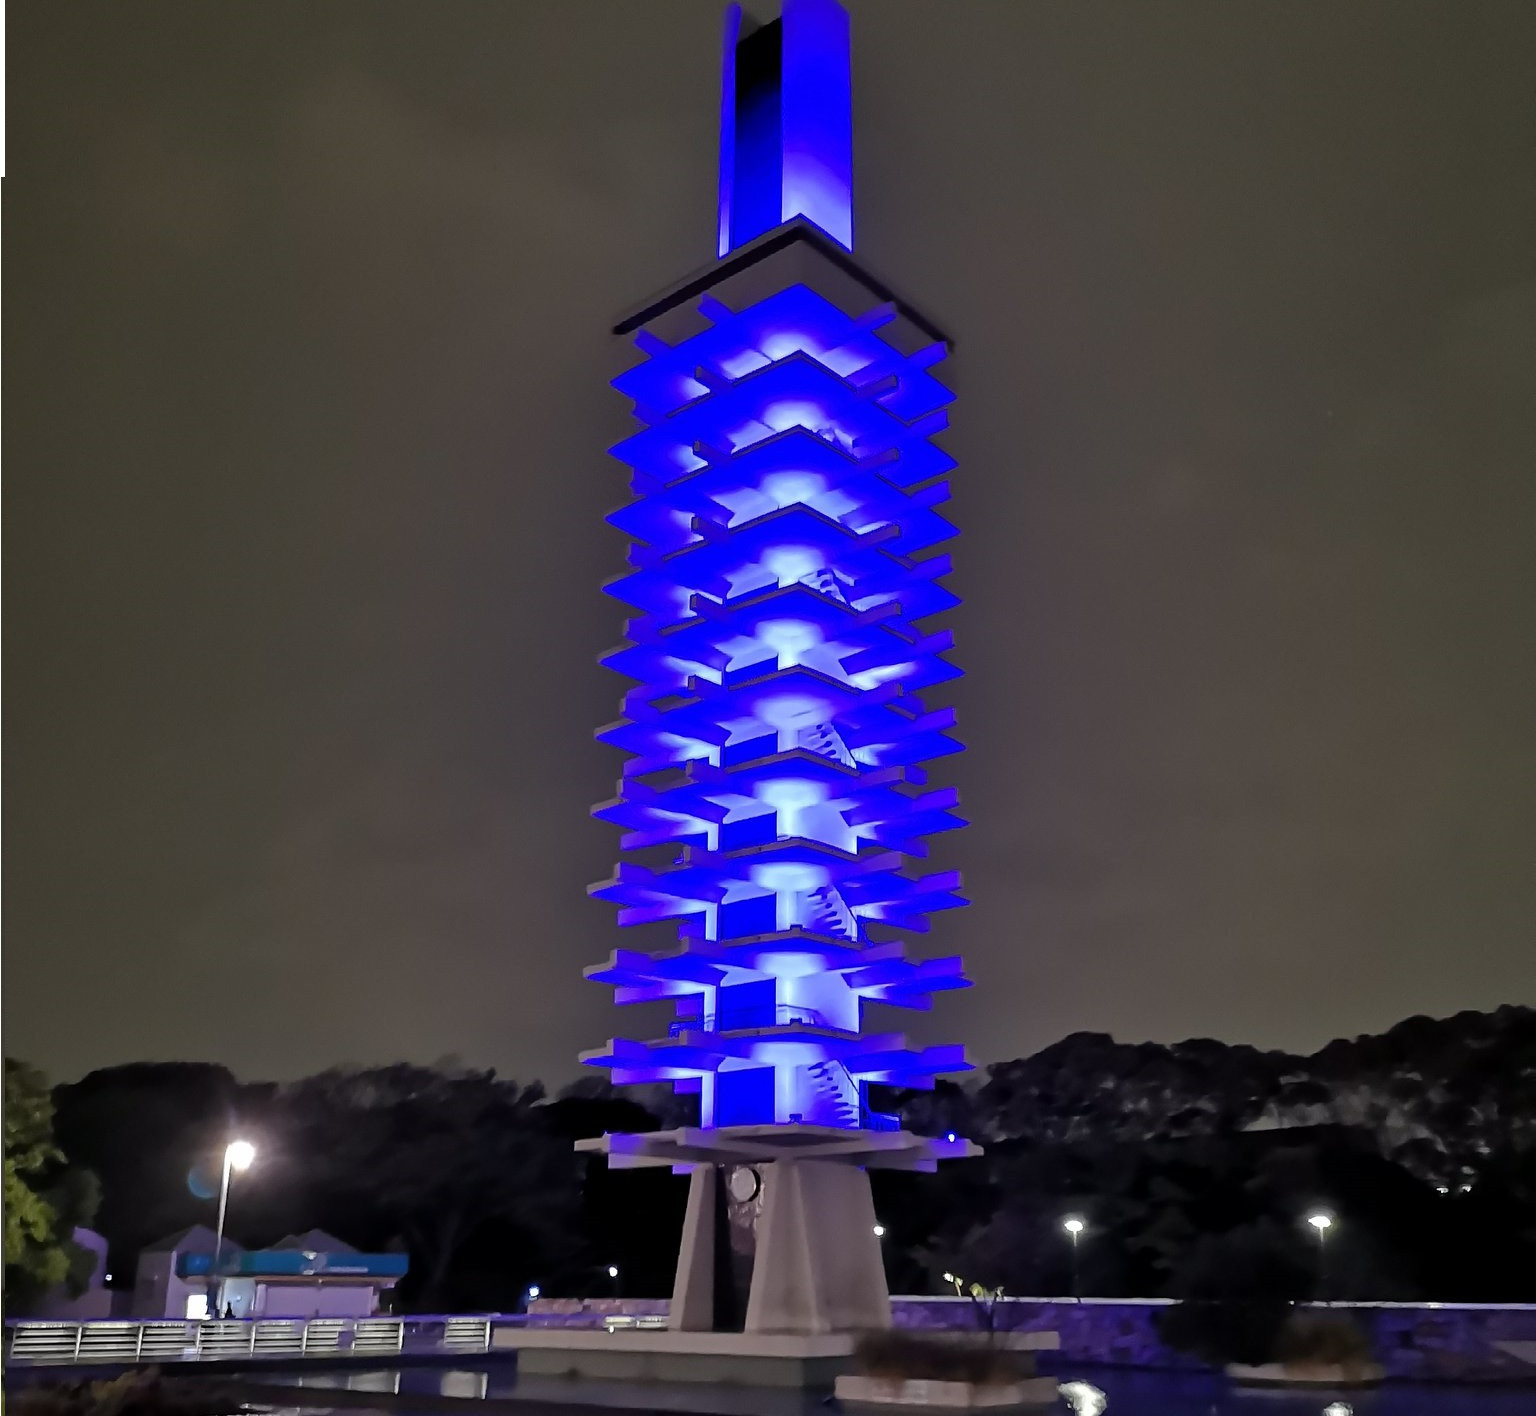 Tokyo 1964 Olympic monument turned blue to pay tribute to doctors and nurses